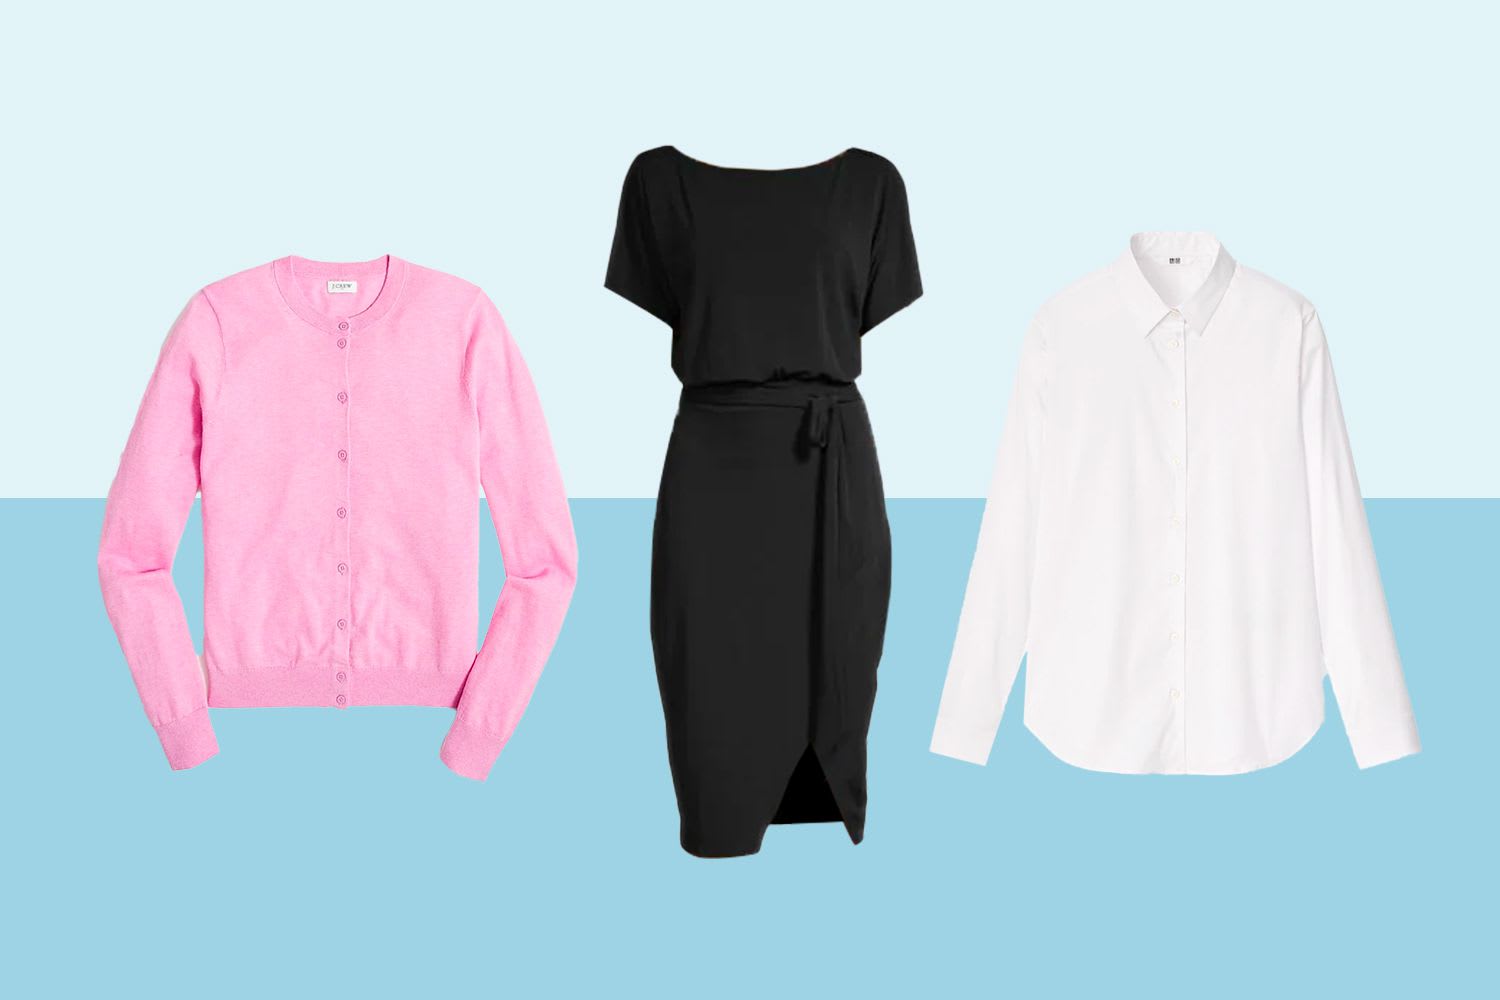 10 Stylish Sites to Shop for Affordable Women's Work Clothes